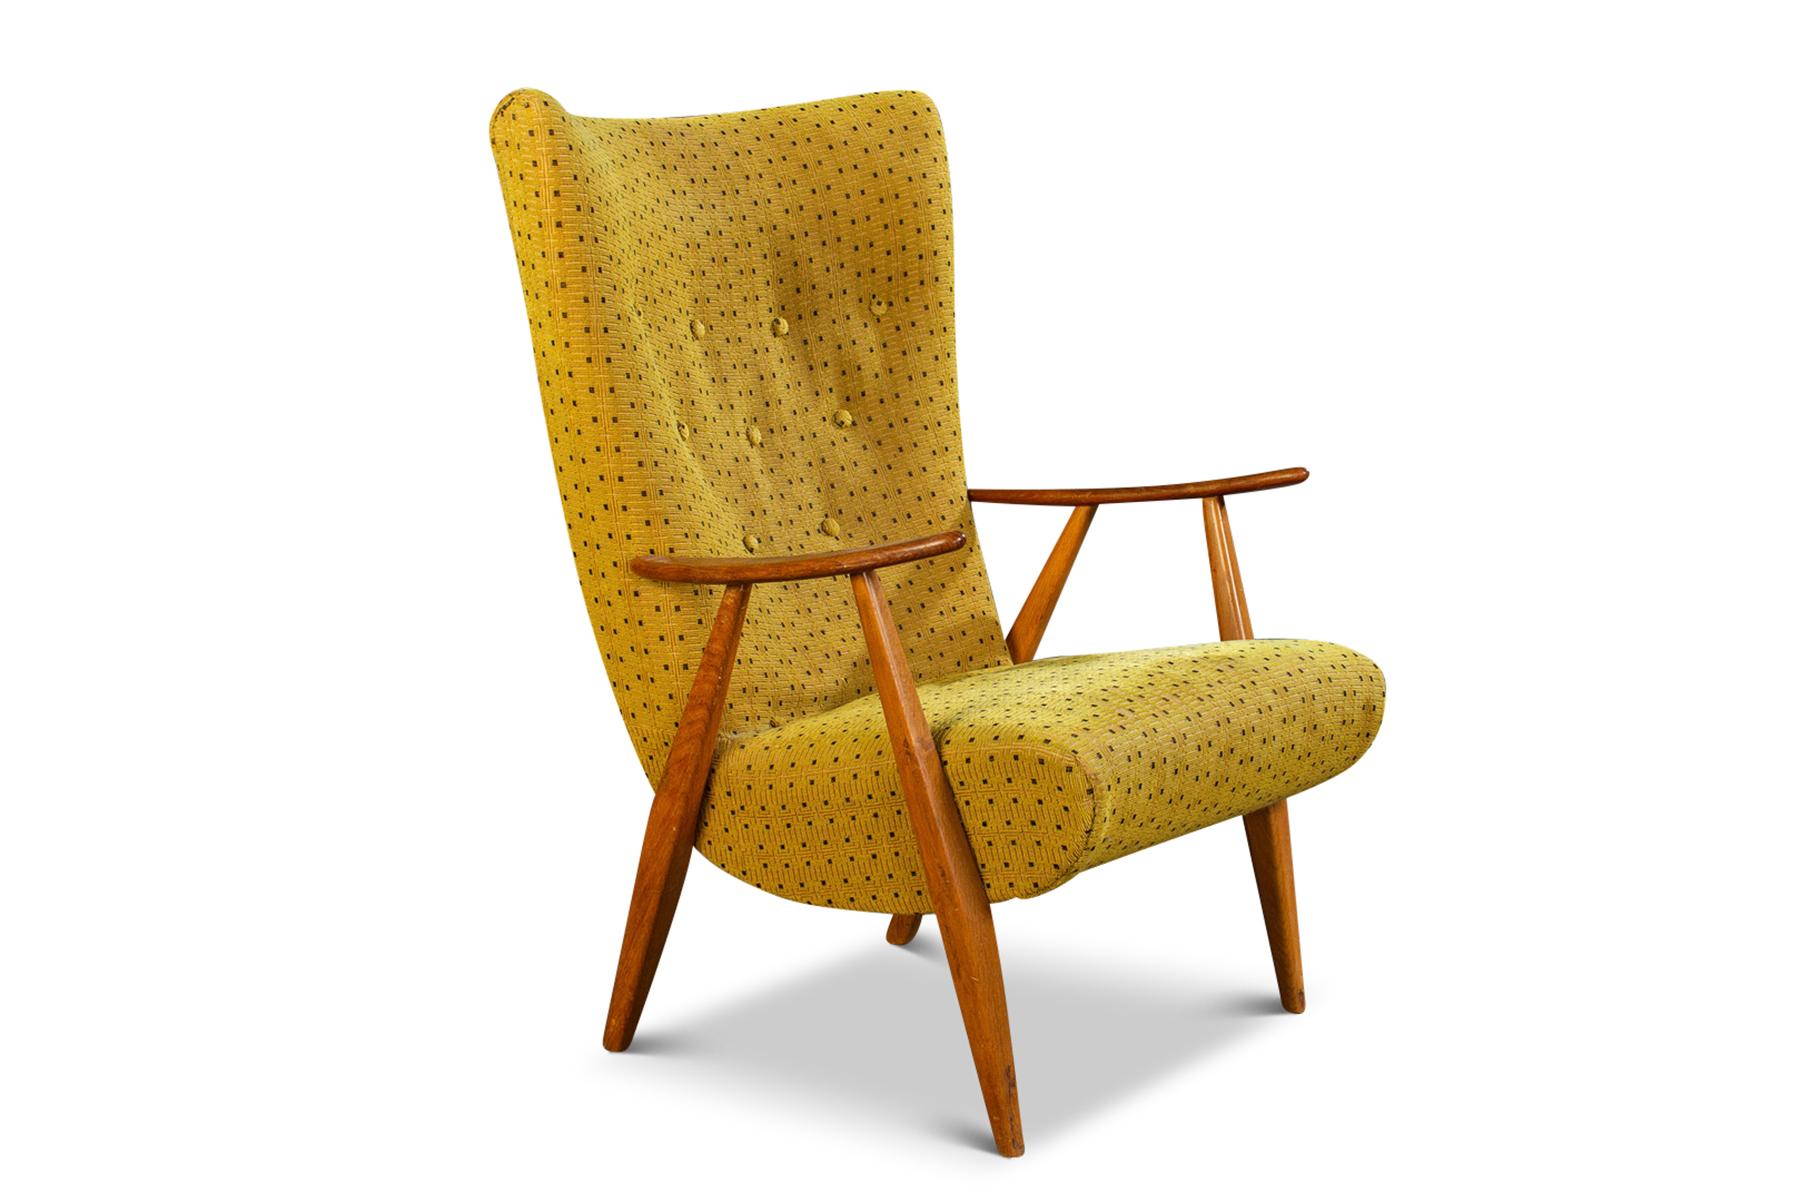 1950s Cocktail Chair in Teak + Yellow Wool In Excellent Condition For Sale In Berkeley, CA